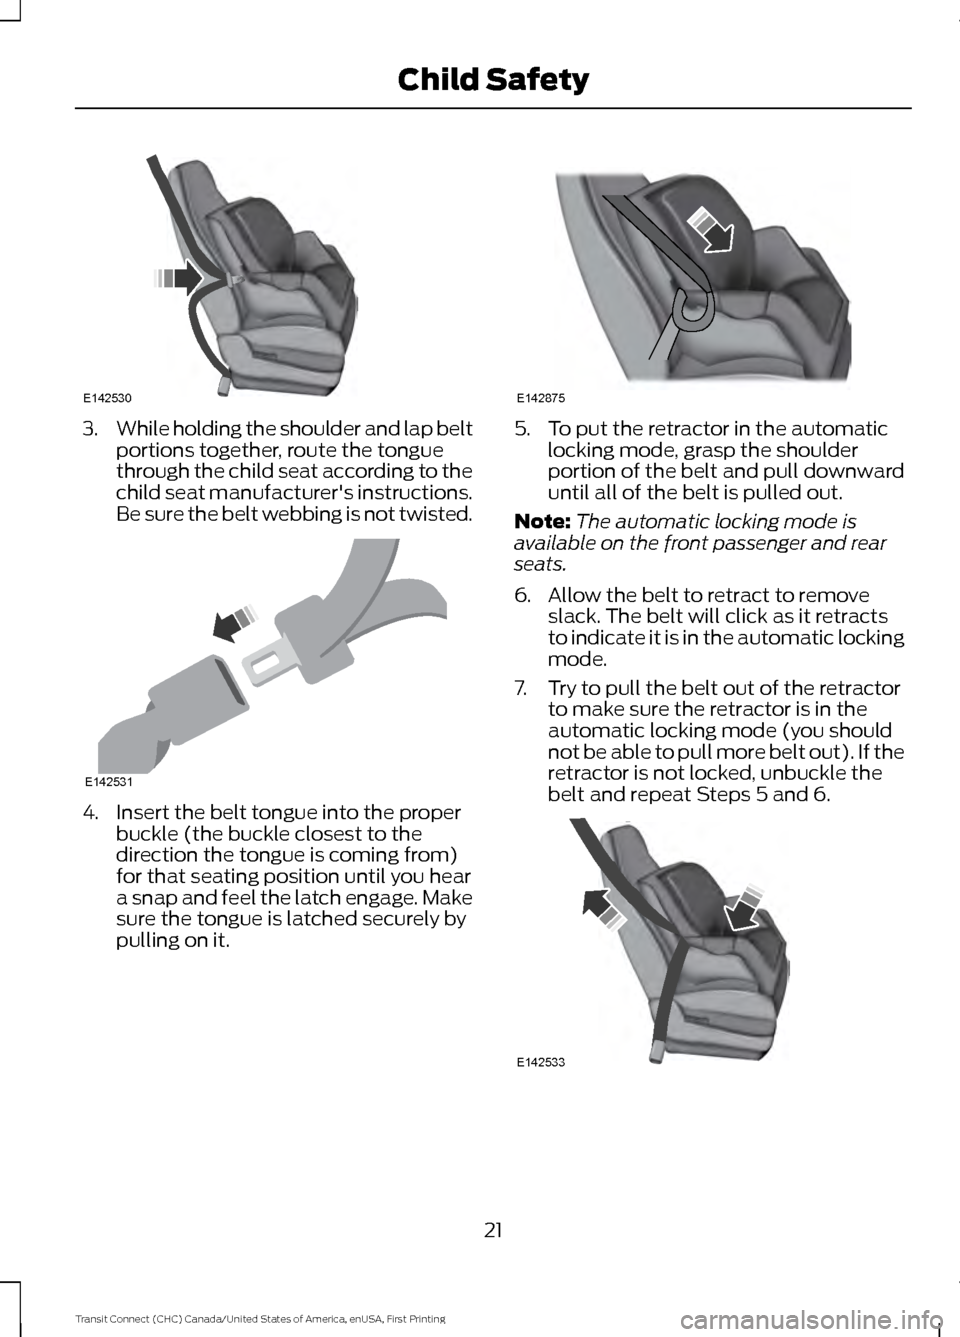 FORD TRANSIT CONNECT 2015 2.G Owners Manual 3.
While holding the shoulder and lap belt
portions together, route the tongue
through the child seat according to the
child seat manufacturers instructions.
Be sure the belt webbing is not twisted. 